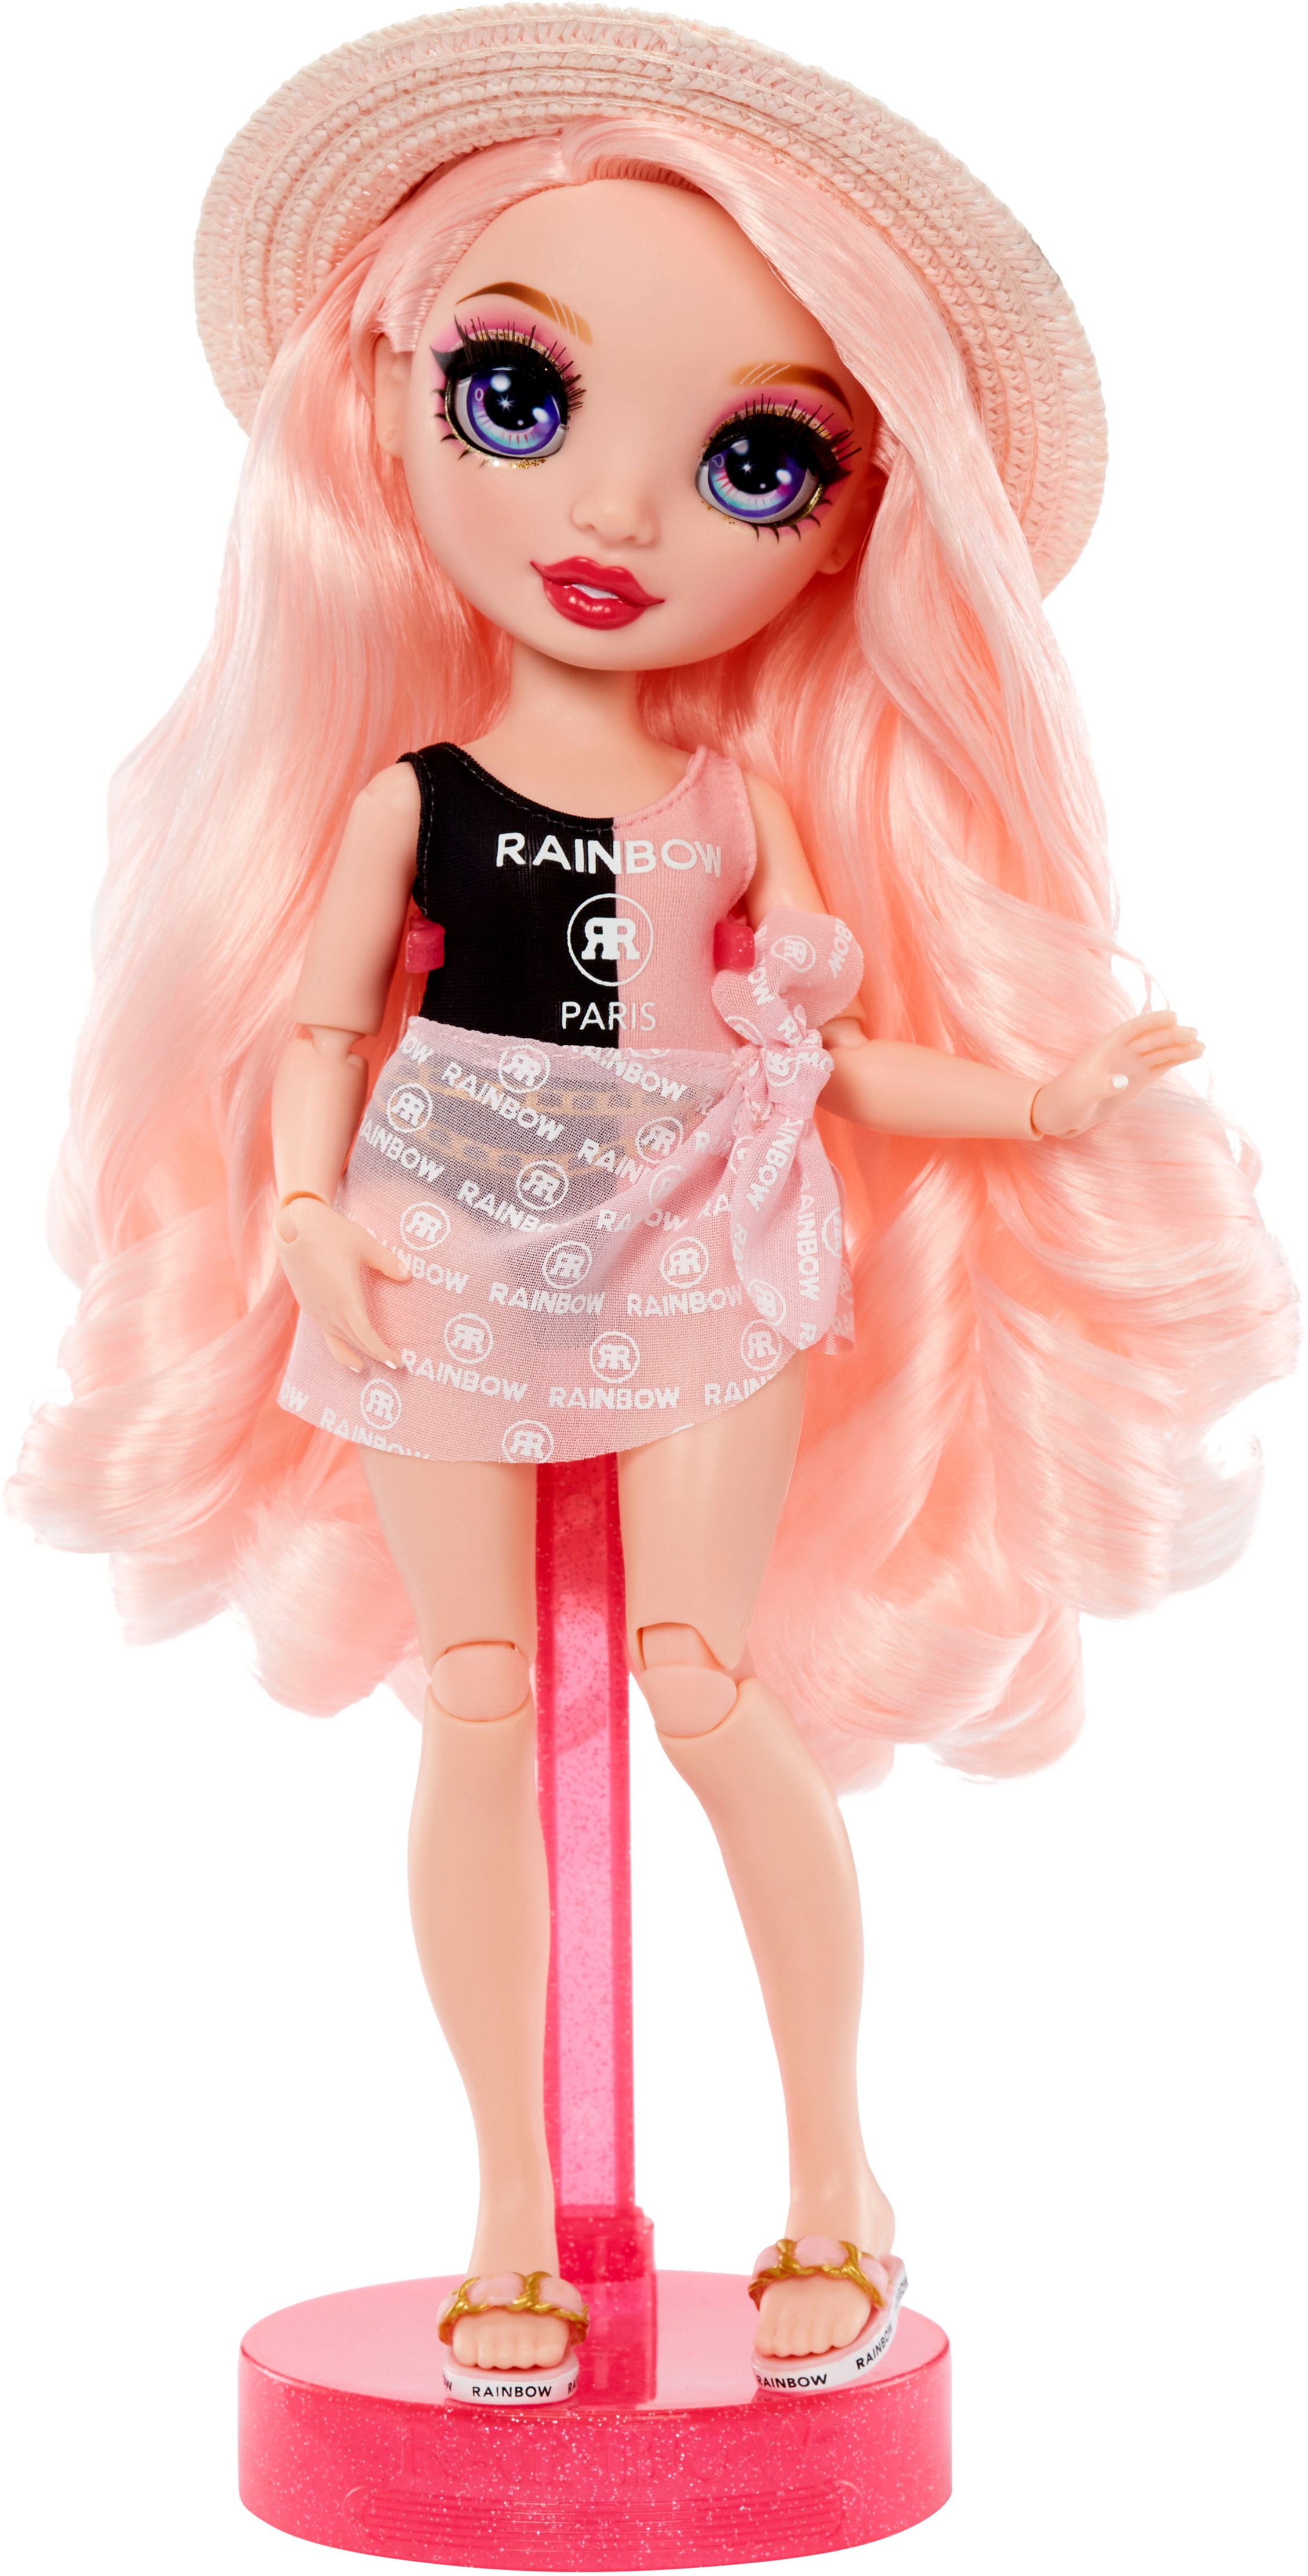 Left View: Rainbow High Pacific Coast Fashion Doll- Bella Parker (Pink)